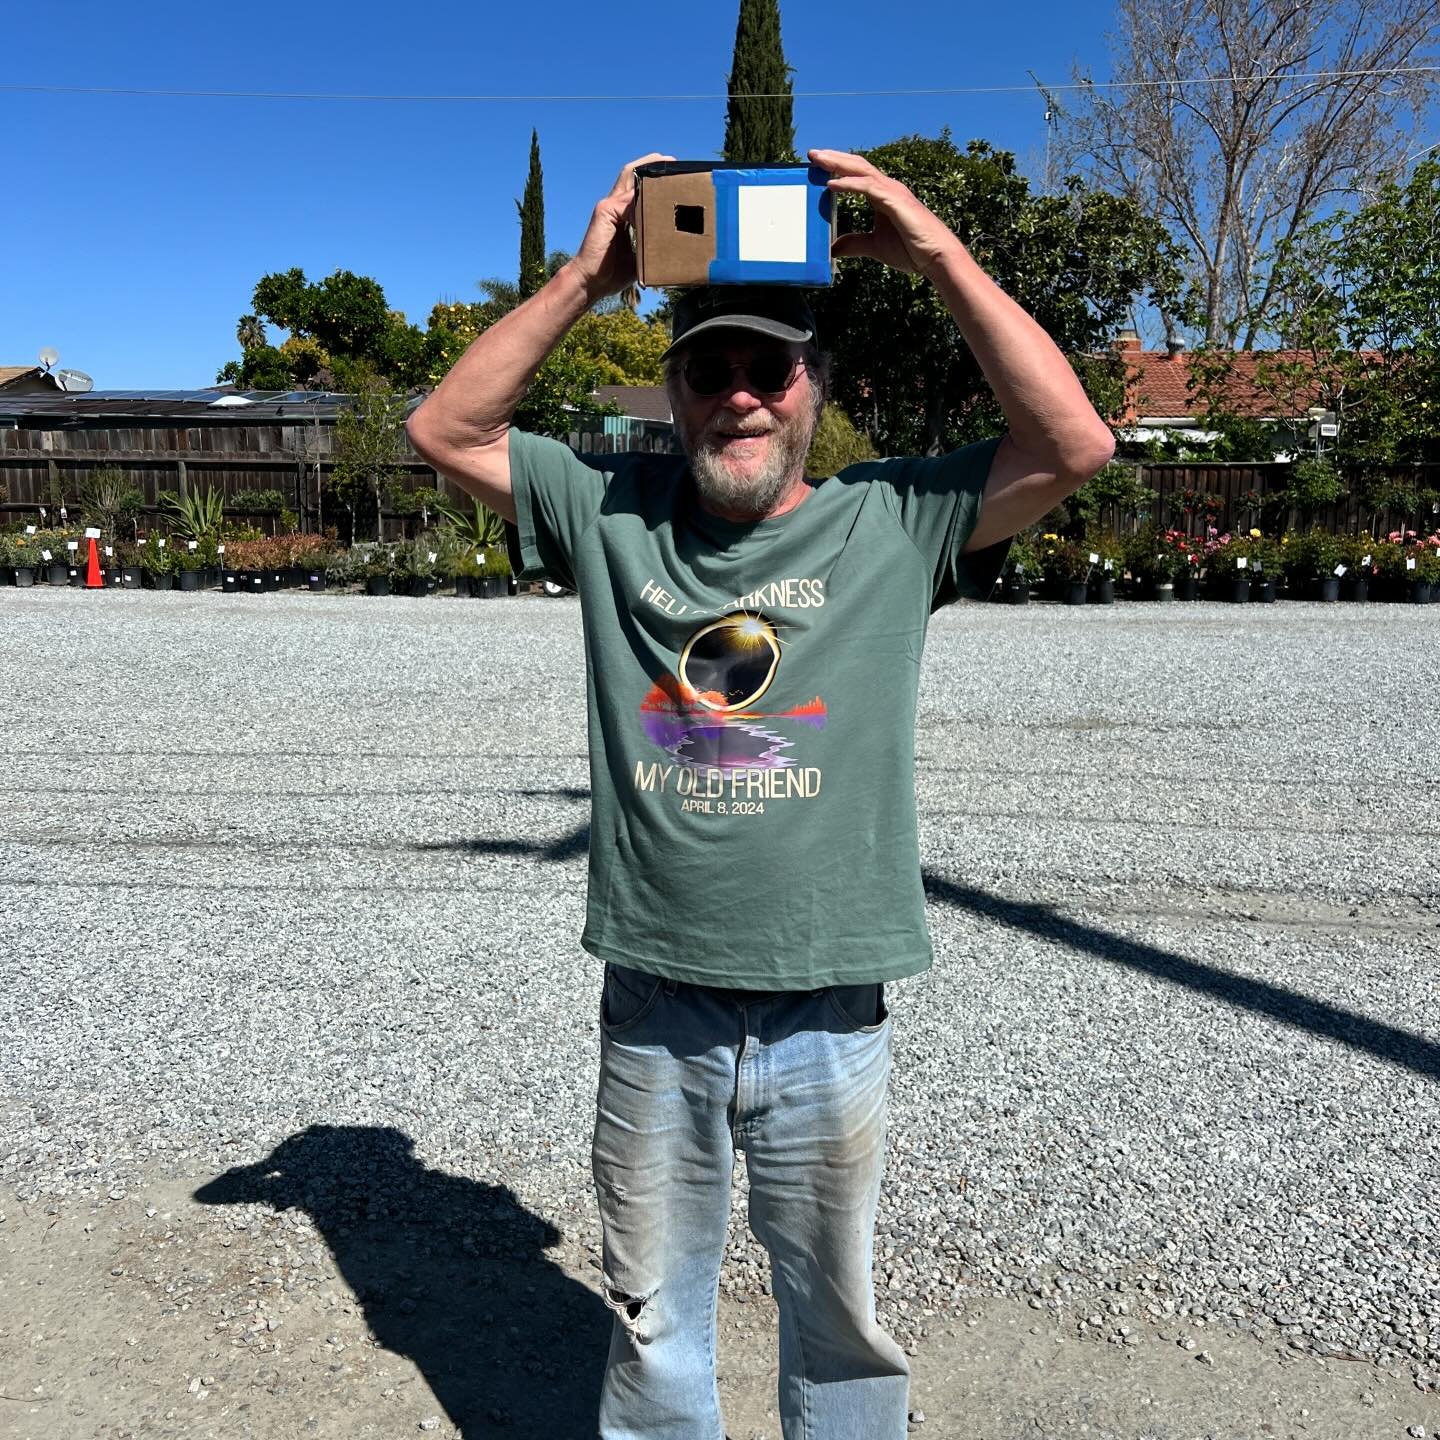 Dave wore his eclipse-themed tshirt for today&rsquo;s solar event! And is holding our homemade pinhole camera! ☀️ Swipe to see how Brandon uses the camera with his back to the sun. You can see a tiny image of the eclipse projected inside the box! 

A